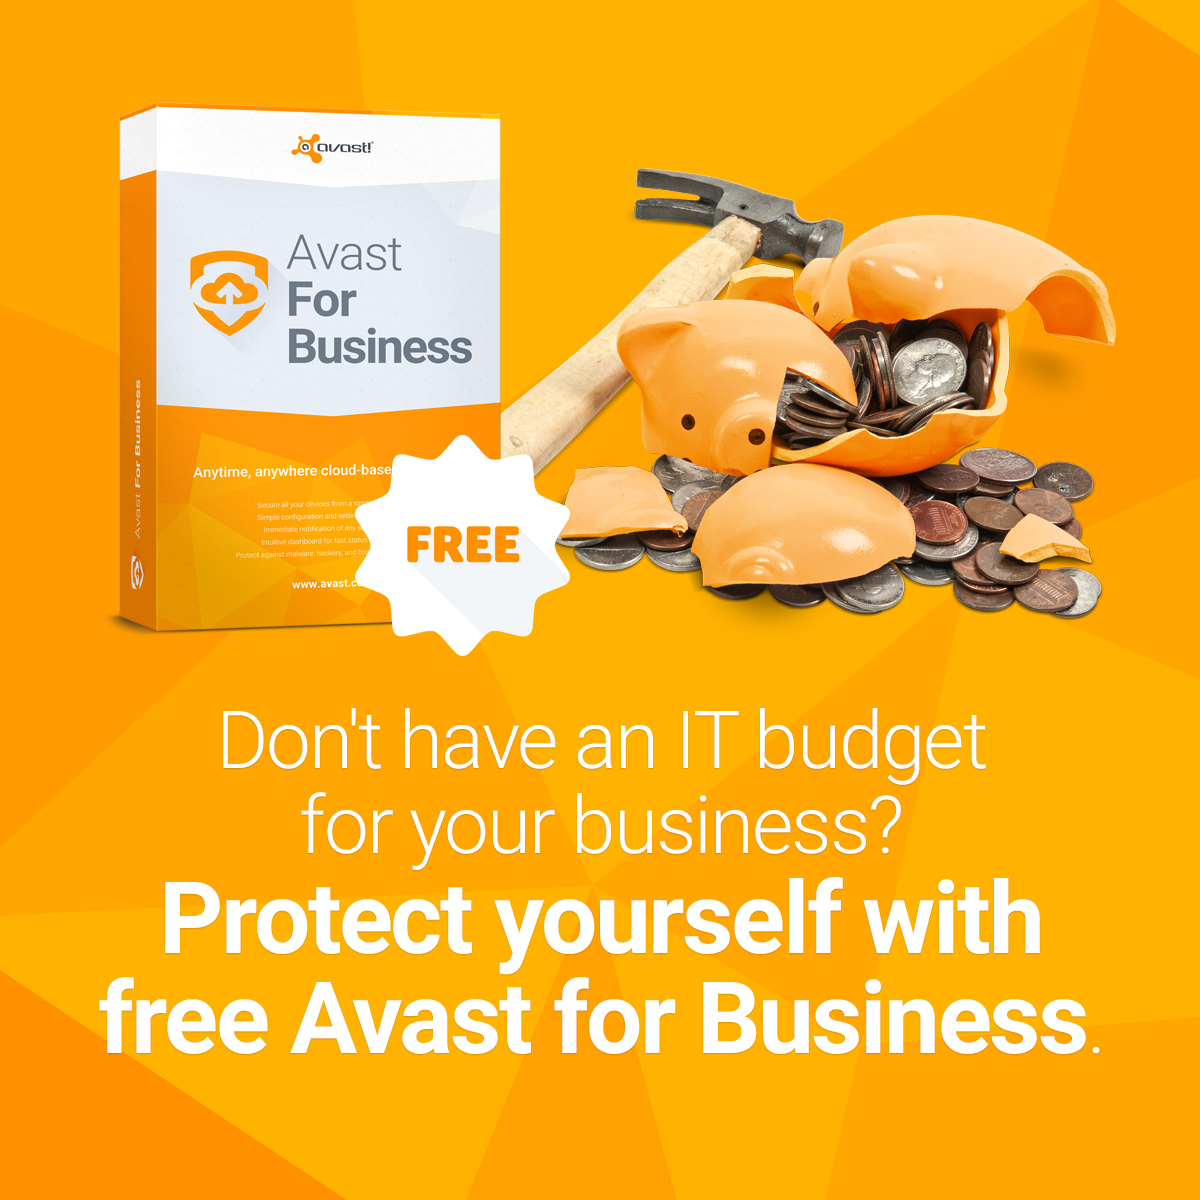 Avast for Business protects SMBs for free